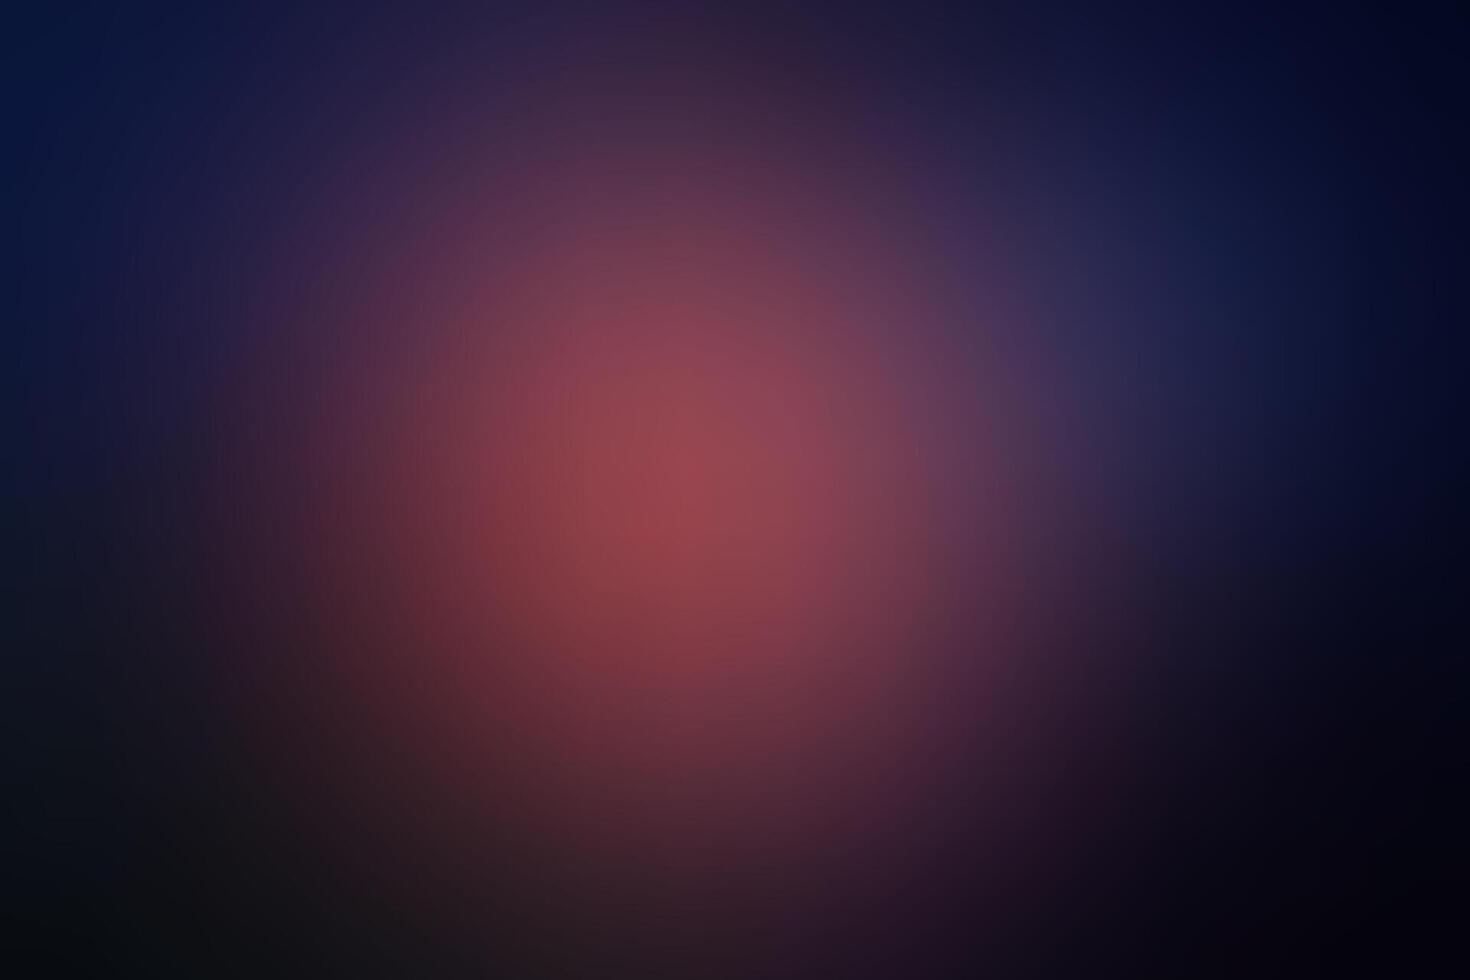 Mesmerizing Abstract Background Design with Blue and Red Gradient vector